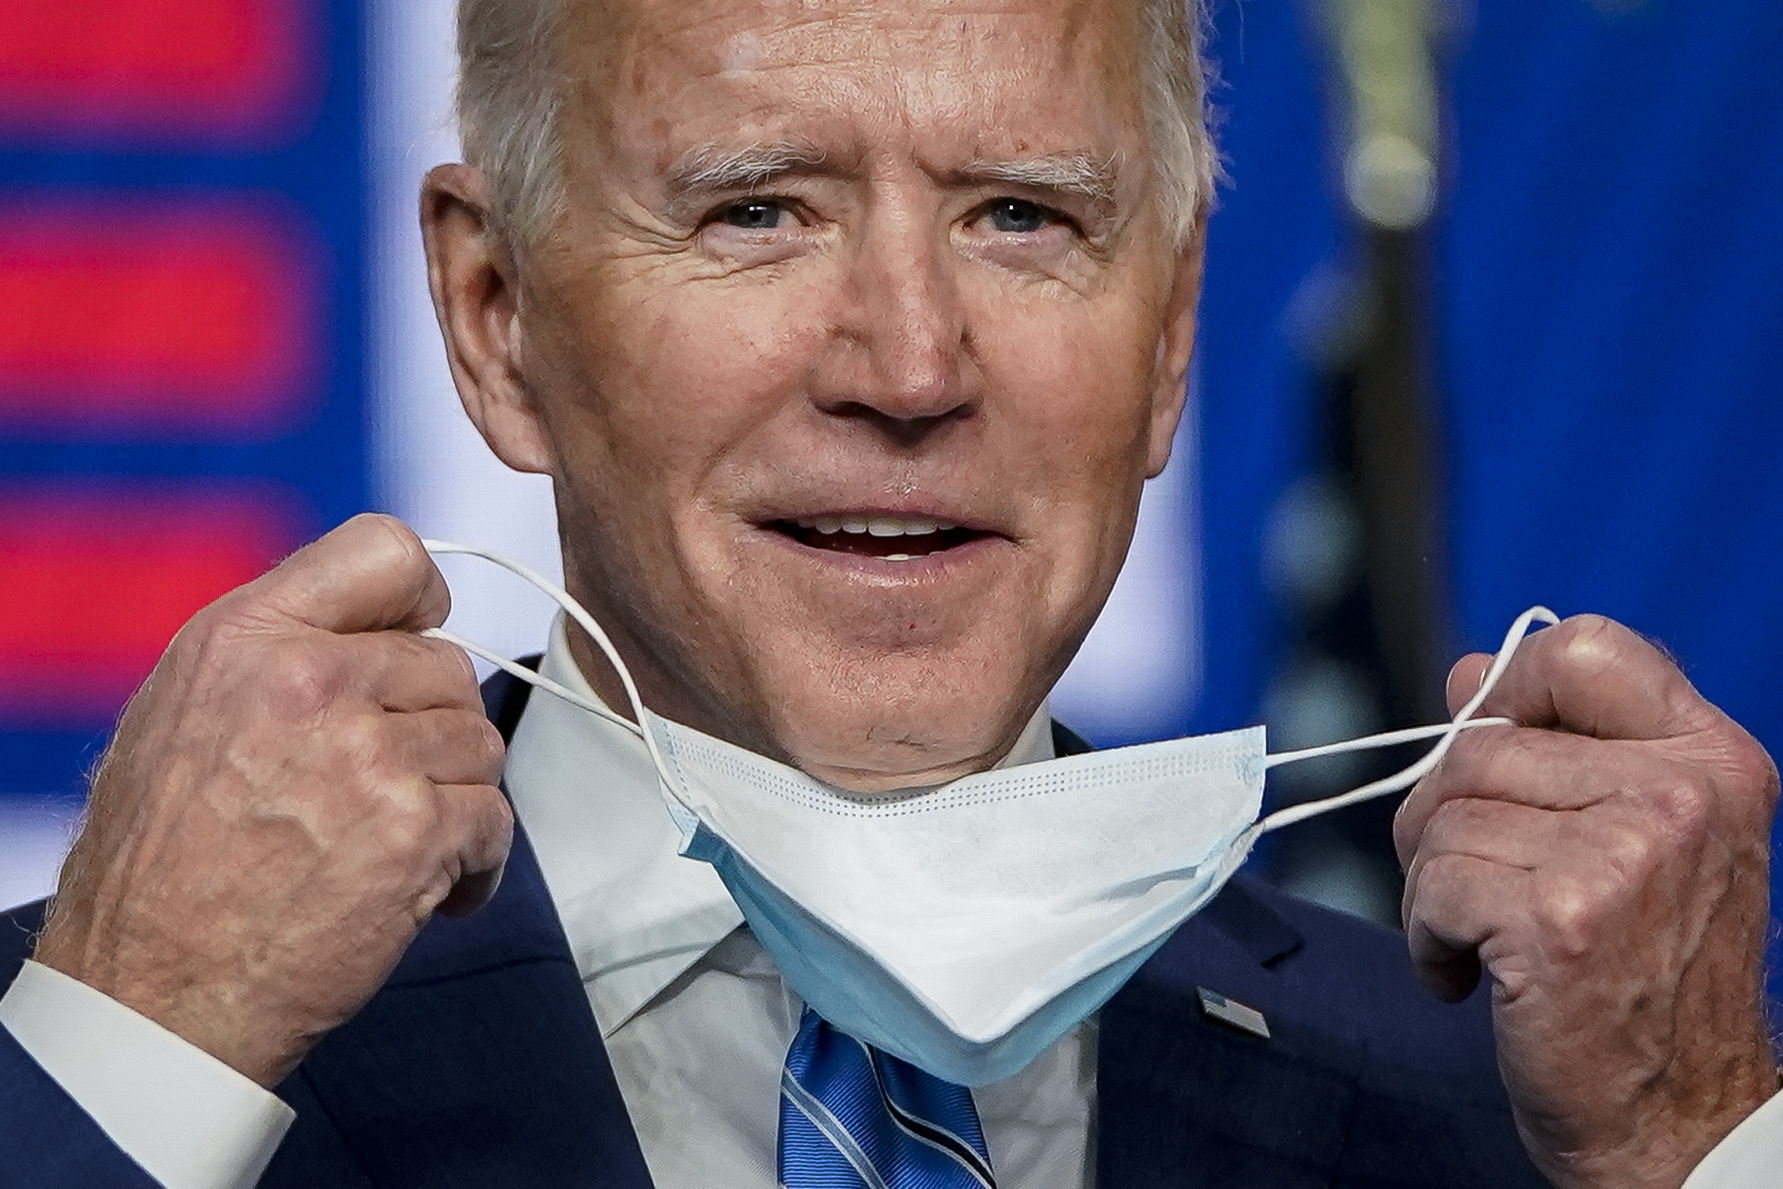 Democratic presidential nominee Joe Biden takes his face mask off as he arrives to speak one day after America voted in the presidential election, on Nov. 4 Wilmington, Delaware. (Drew Angerer/Getty Images)